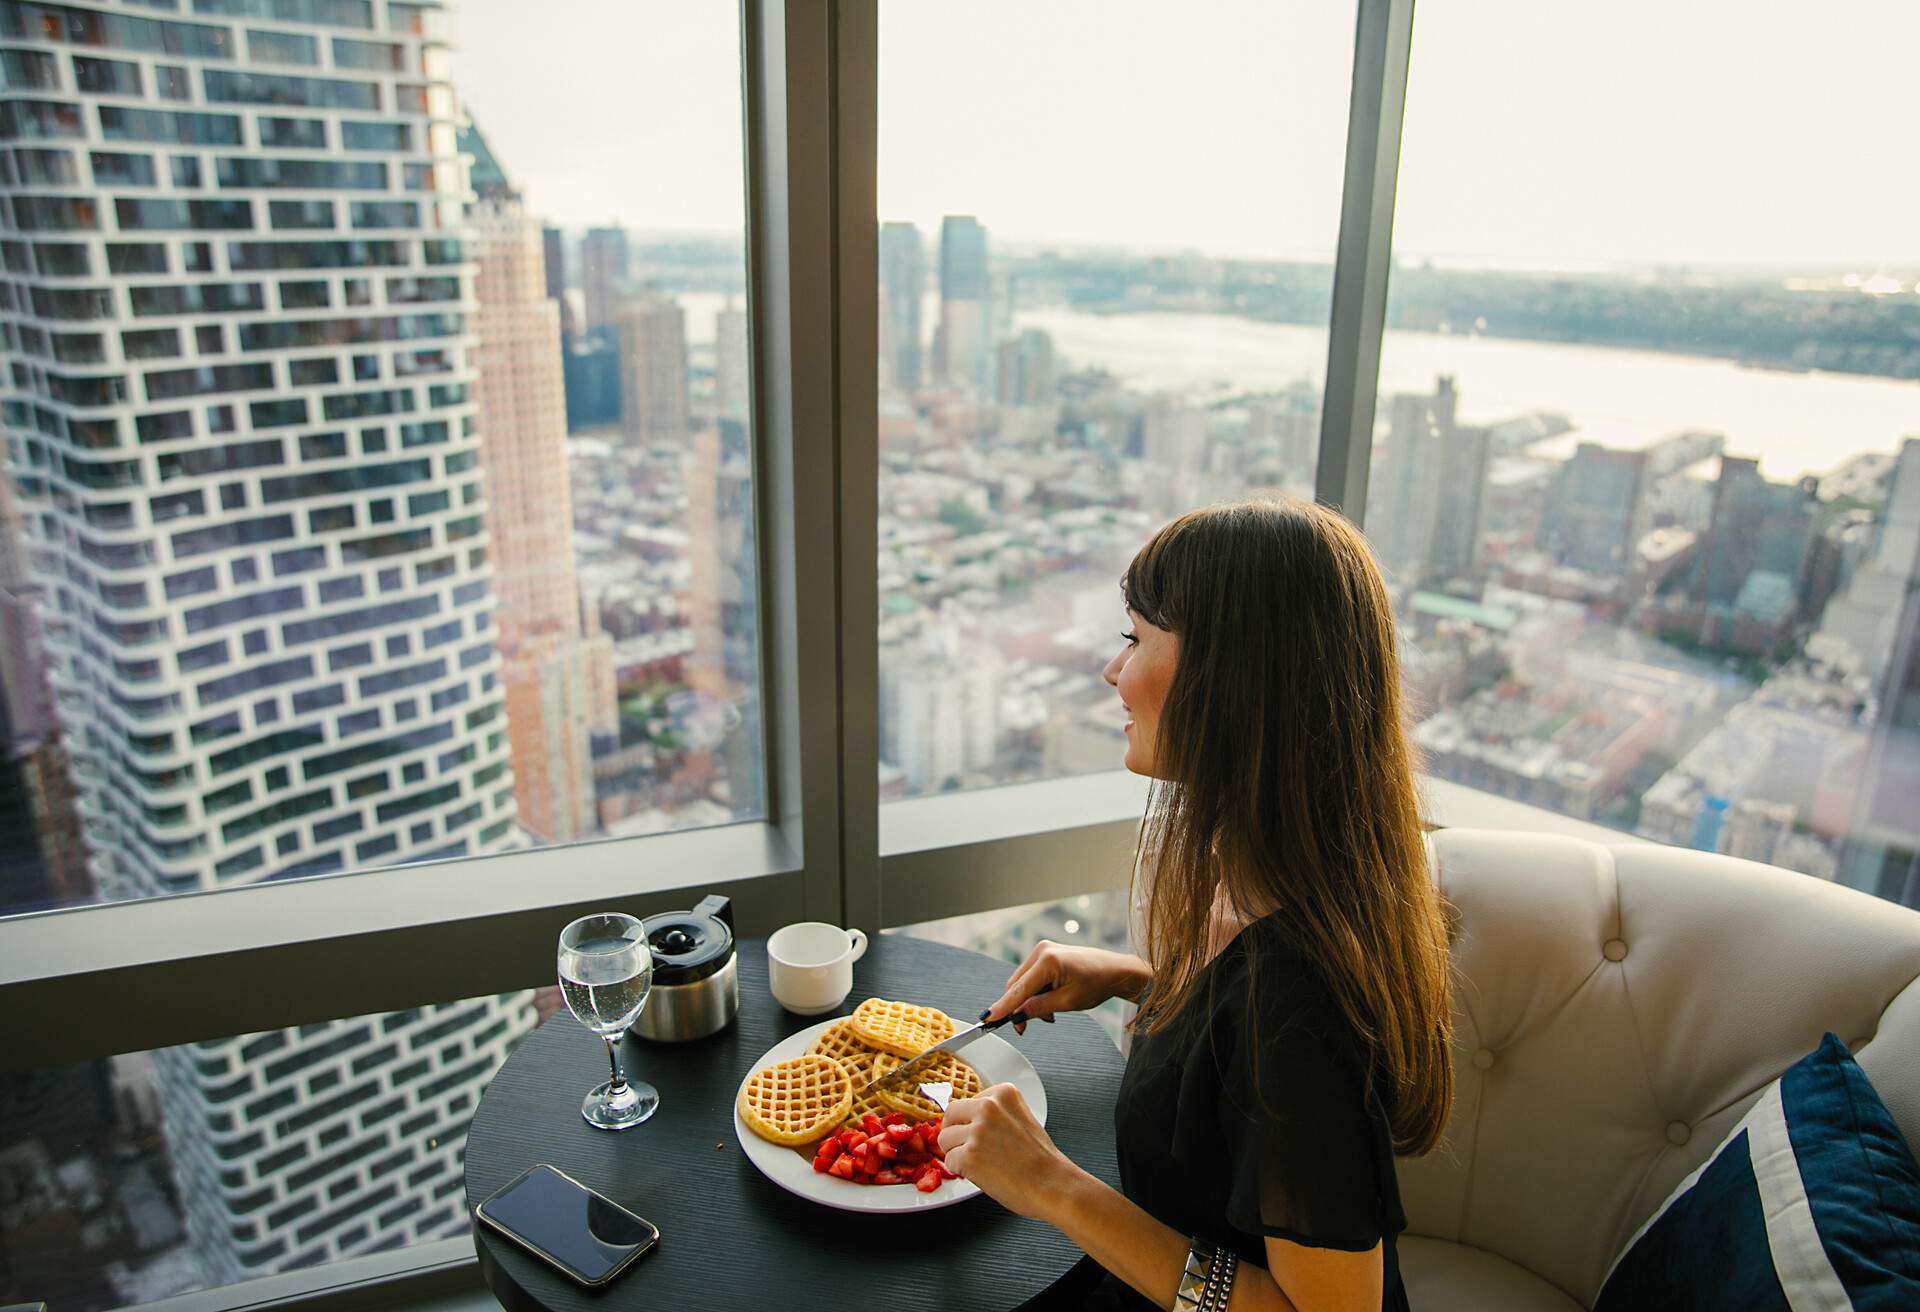 theme_hotel_food_breakfast_dest_usa_new_york_gettyimages-996368646_universal_within-usage-period_34209.jpg